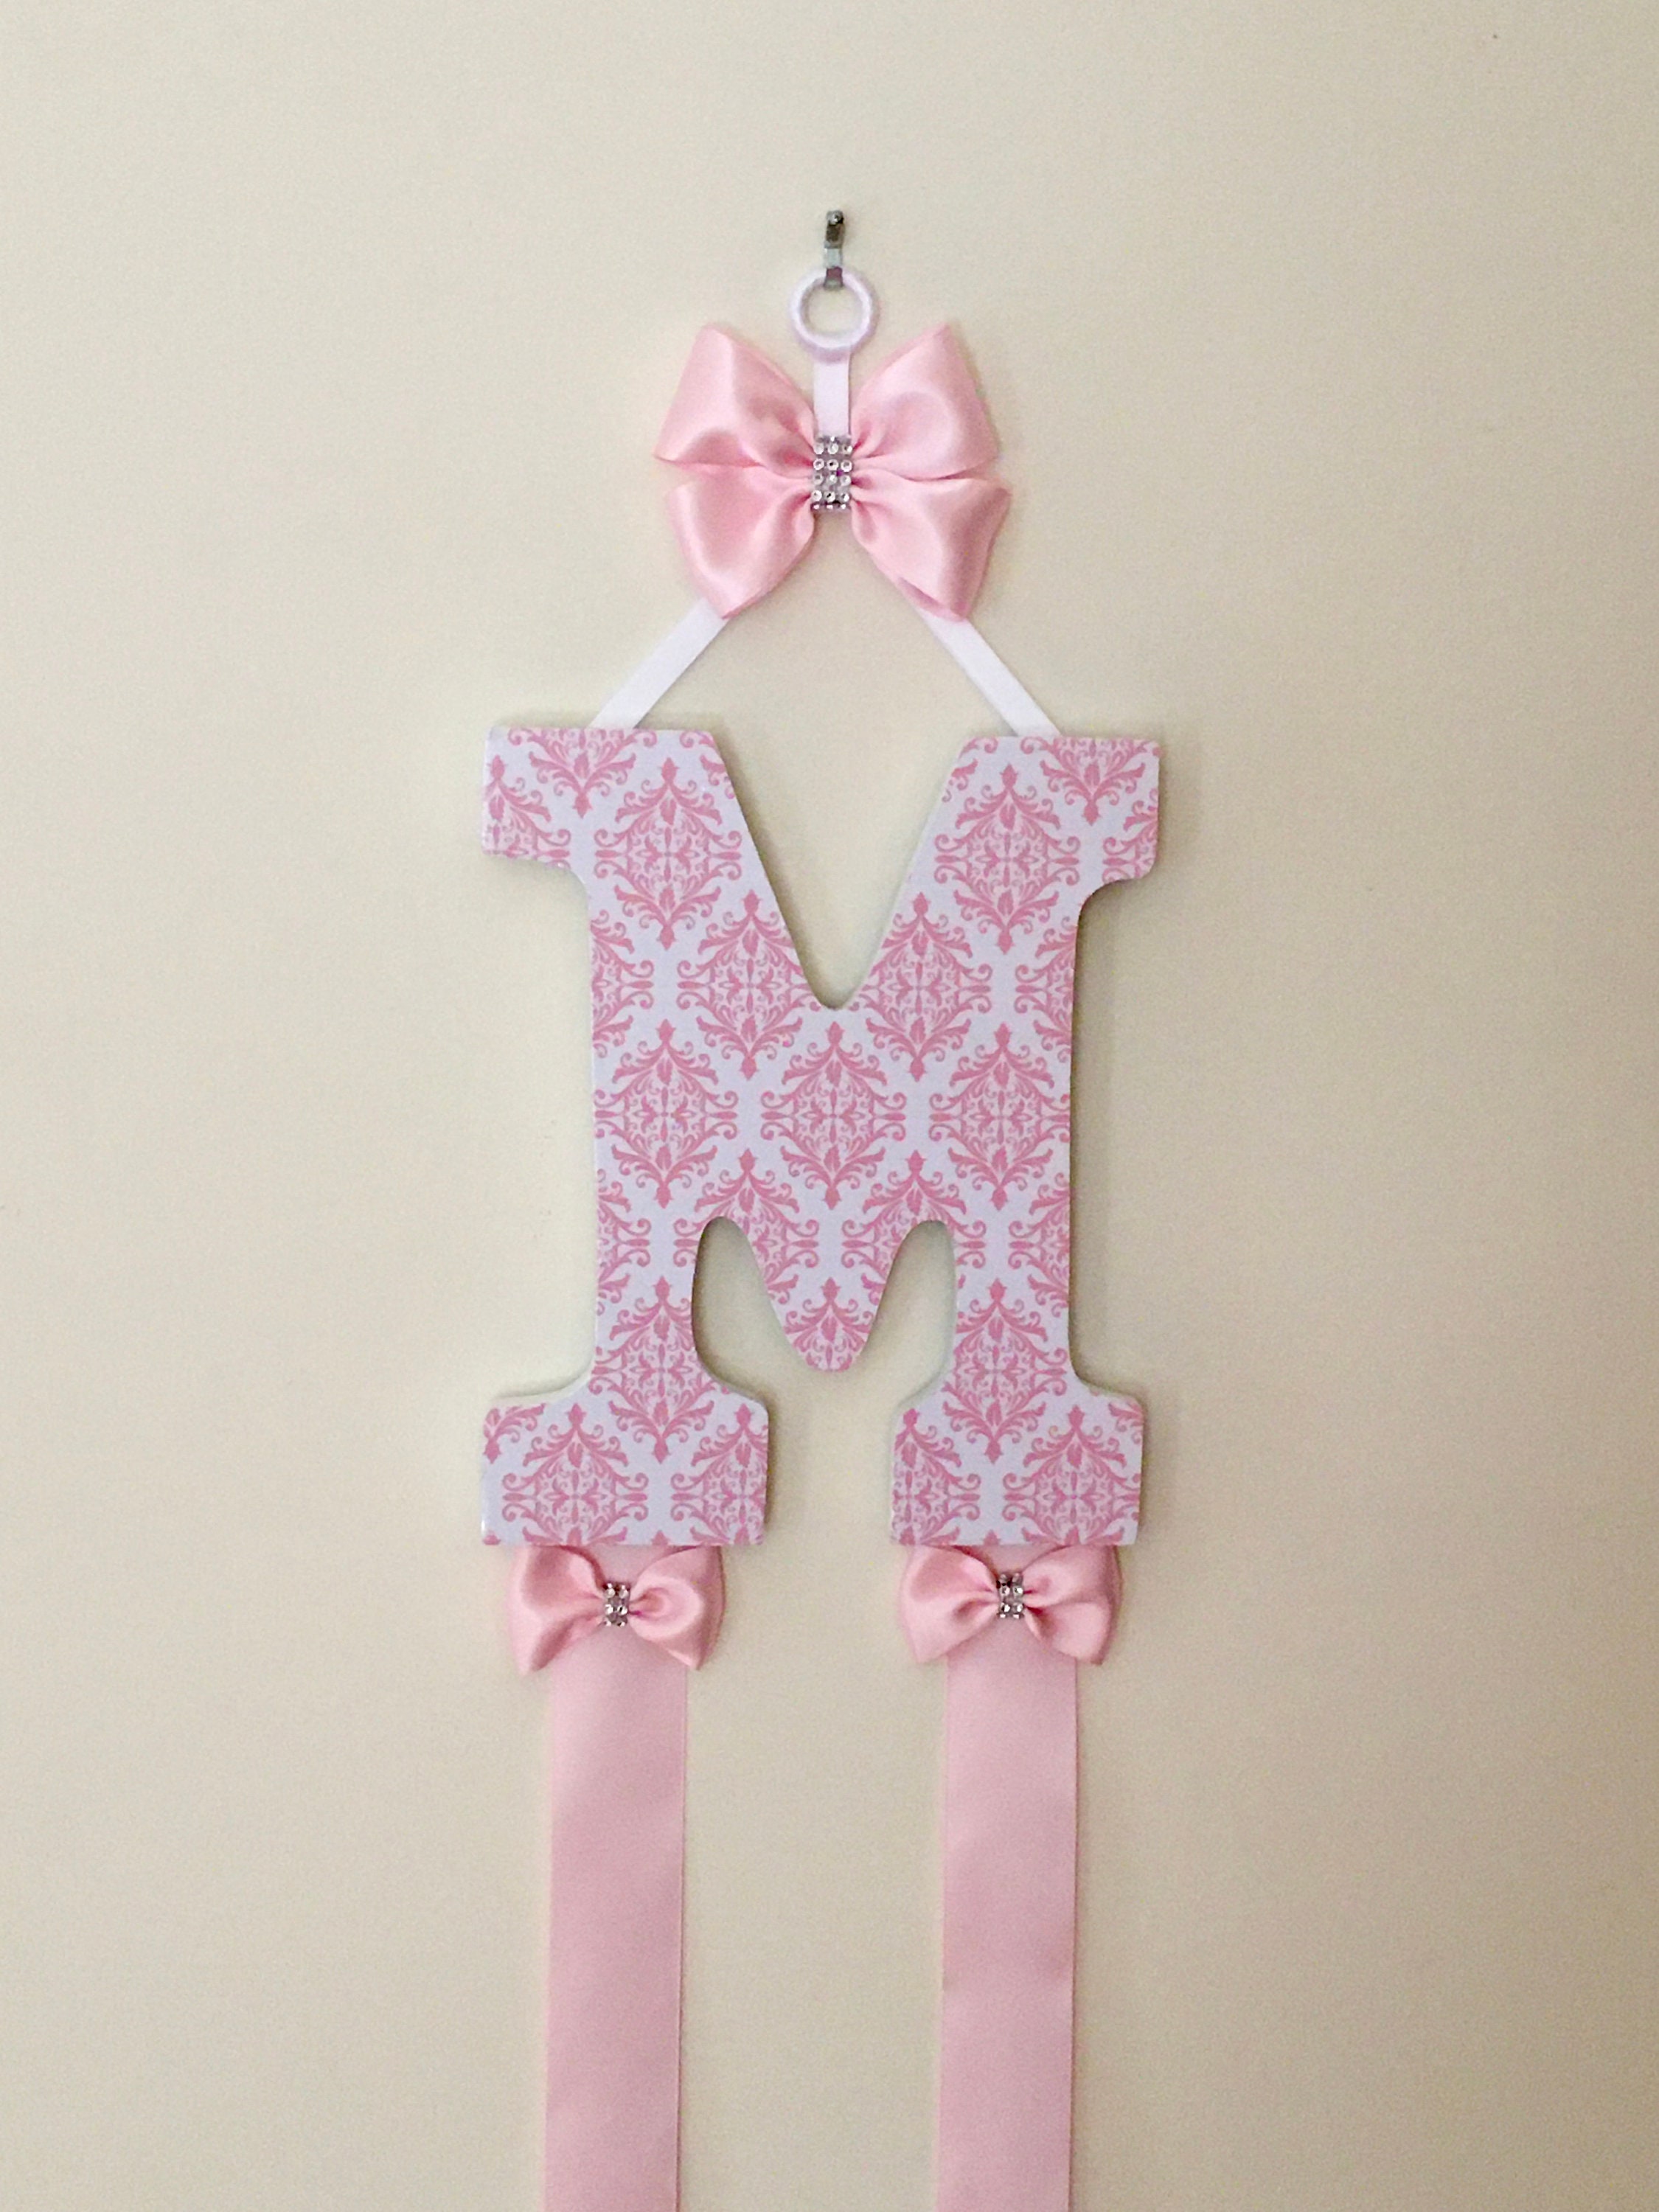 How to Make a Decorative Letter Bow Hanger - The Hair Bow Company -  Boutique Clothes & Bows